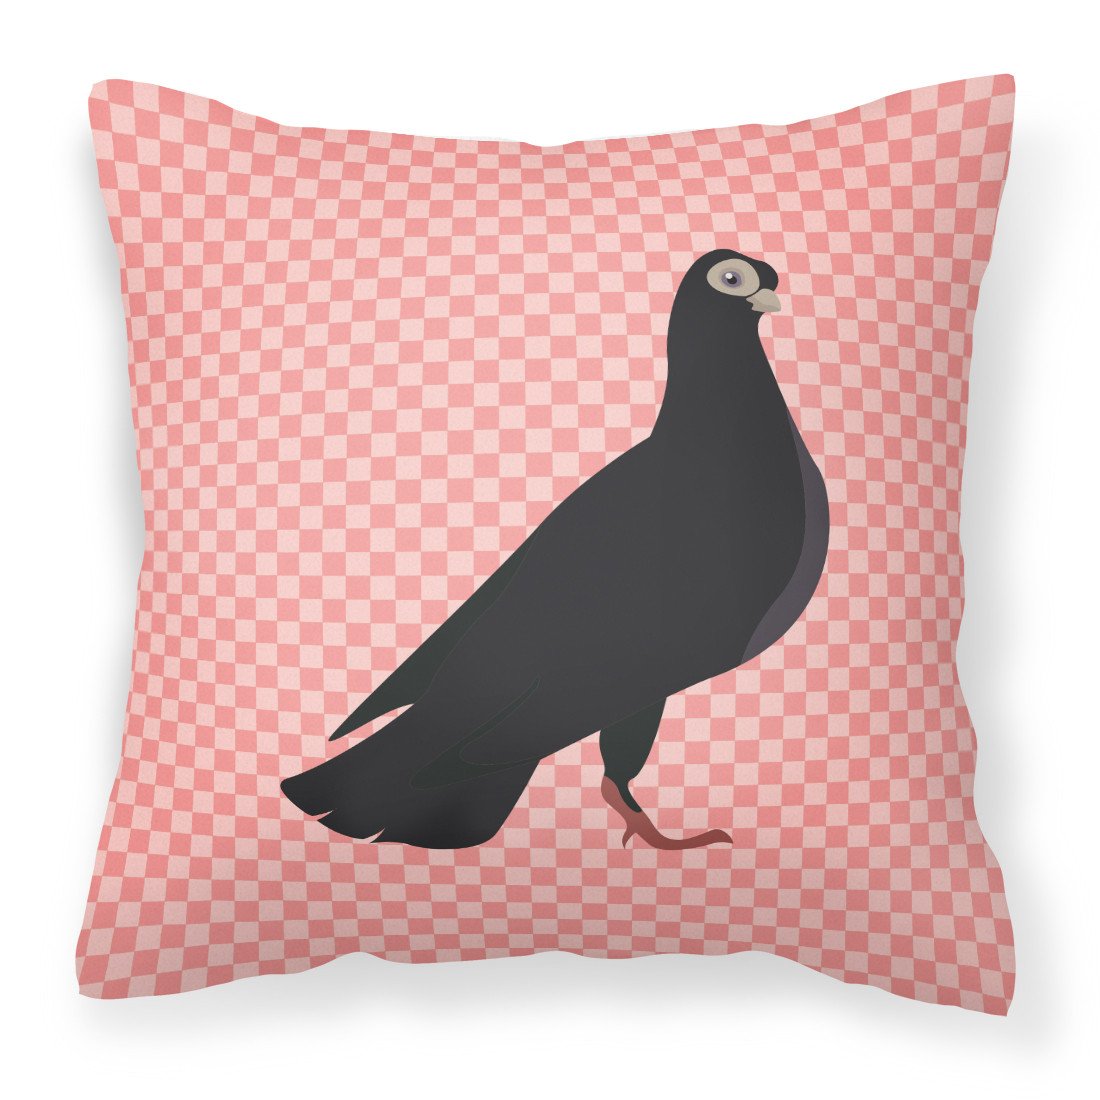 Budapest Highflyer Pigeon Pink Check Fabric Decorative Pillow BB7947PW1818 by Caroline's Treasures